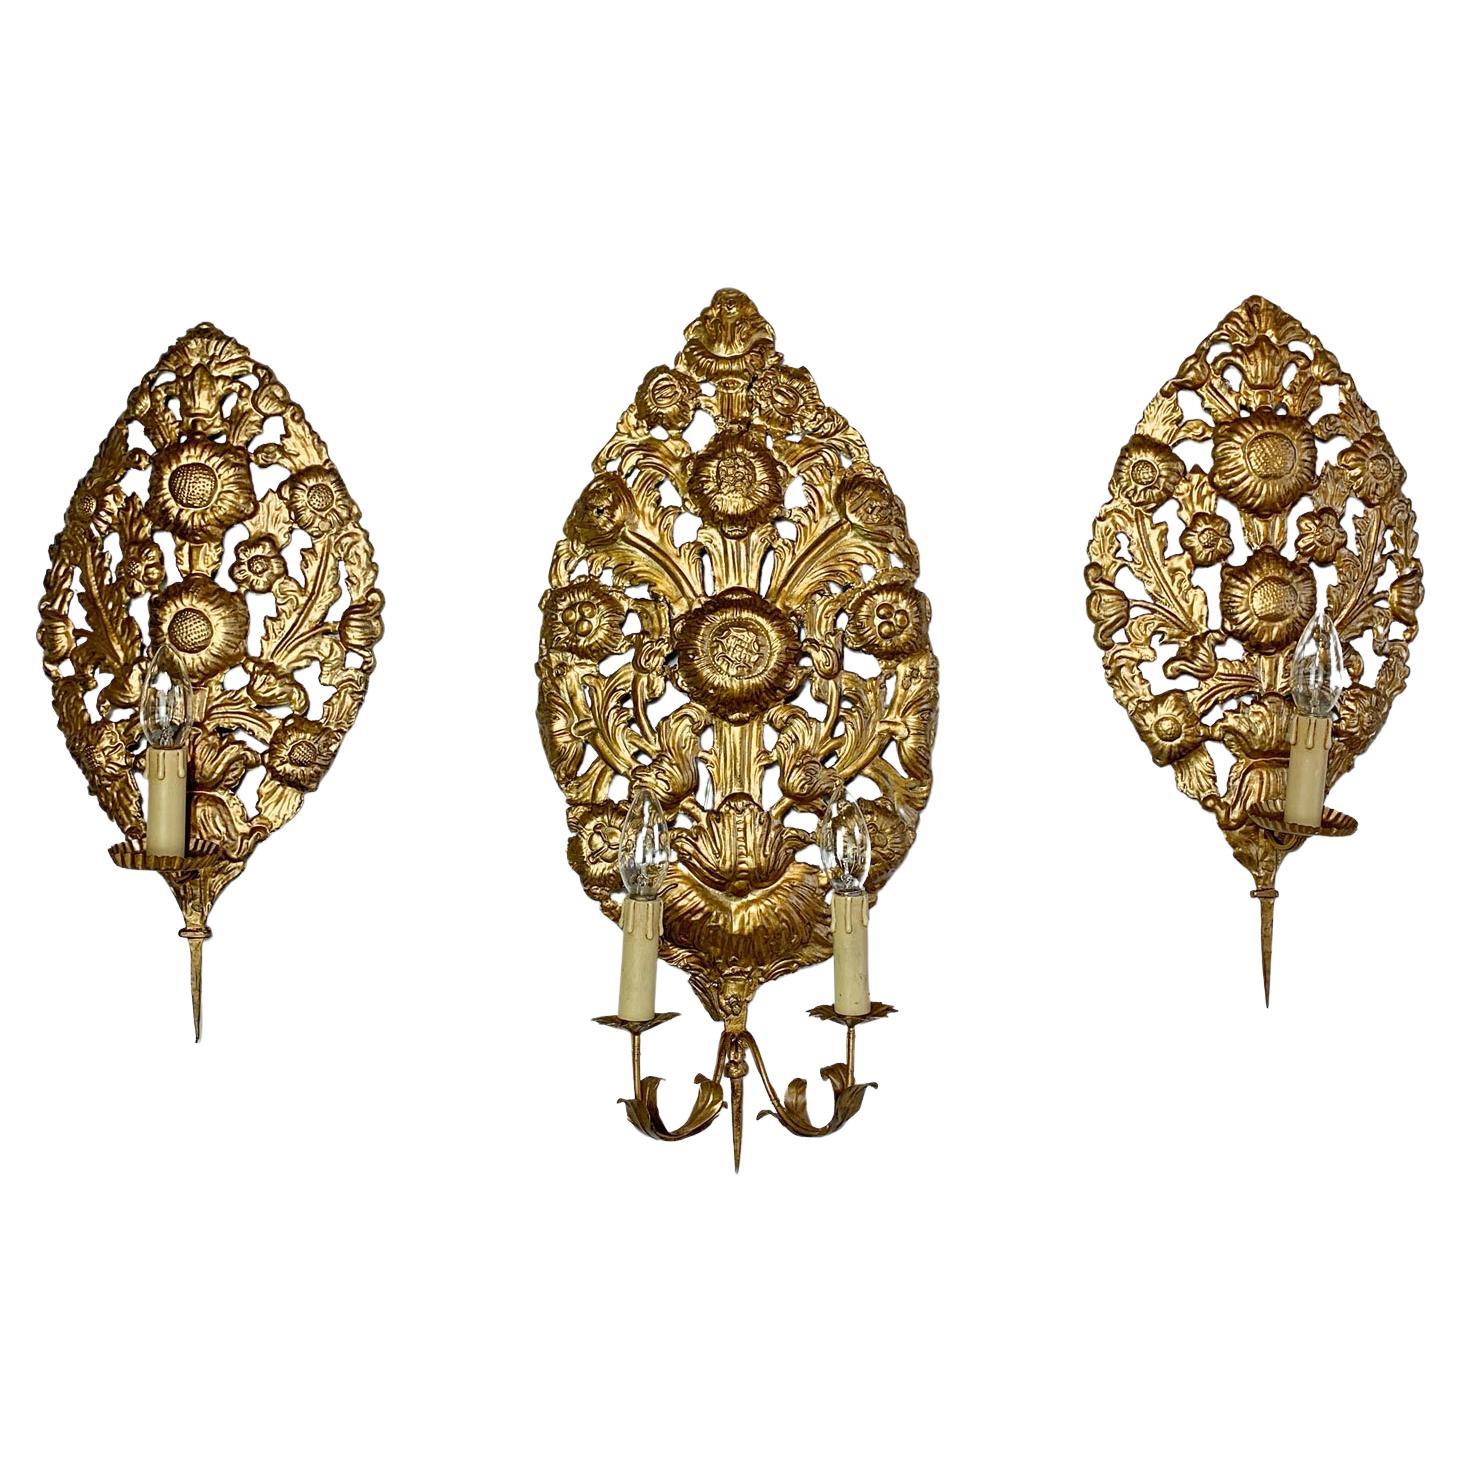 Set of 3 Gold Repousse Baroque Wall Sconces